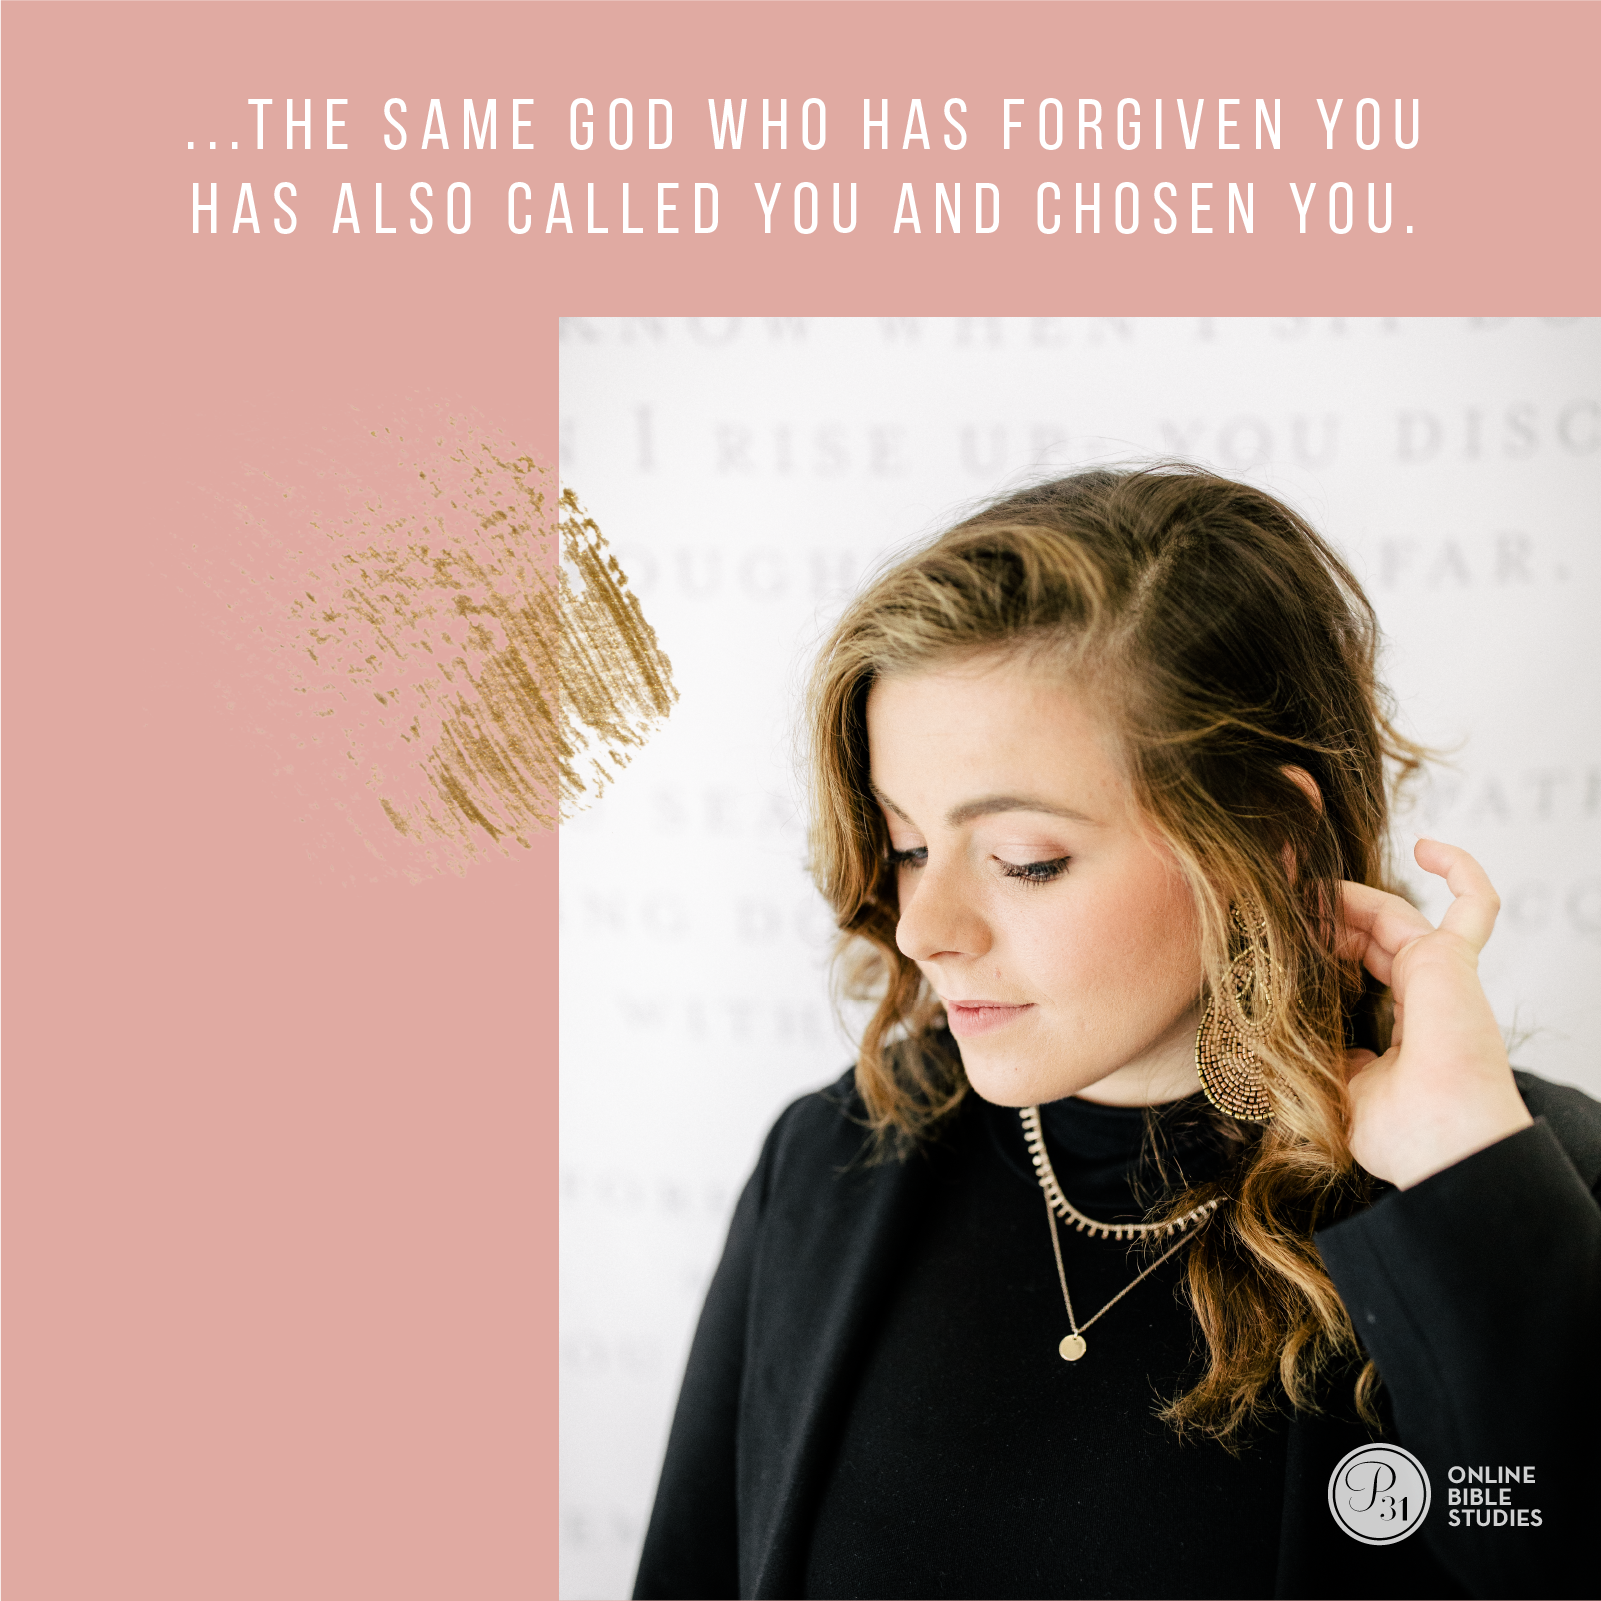 "The same God who has forgiven you has also called you and chosen you." - Craig Groeschel  #DangerousPrayers | Proverbs 31 Online Bible Studies Week 5 #P31OBS